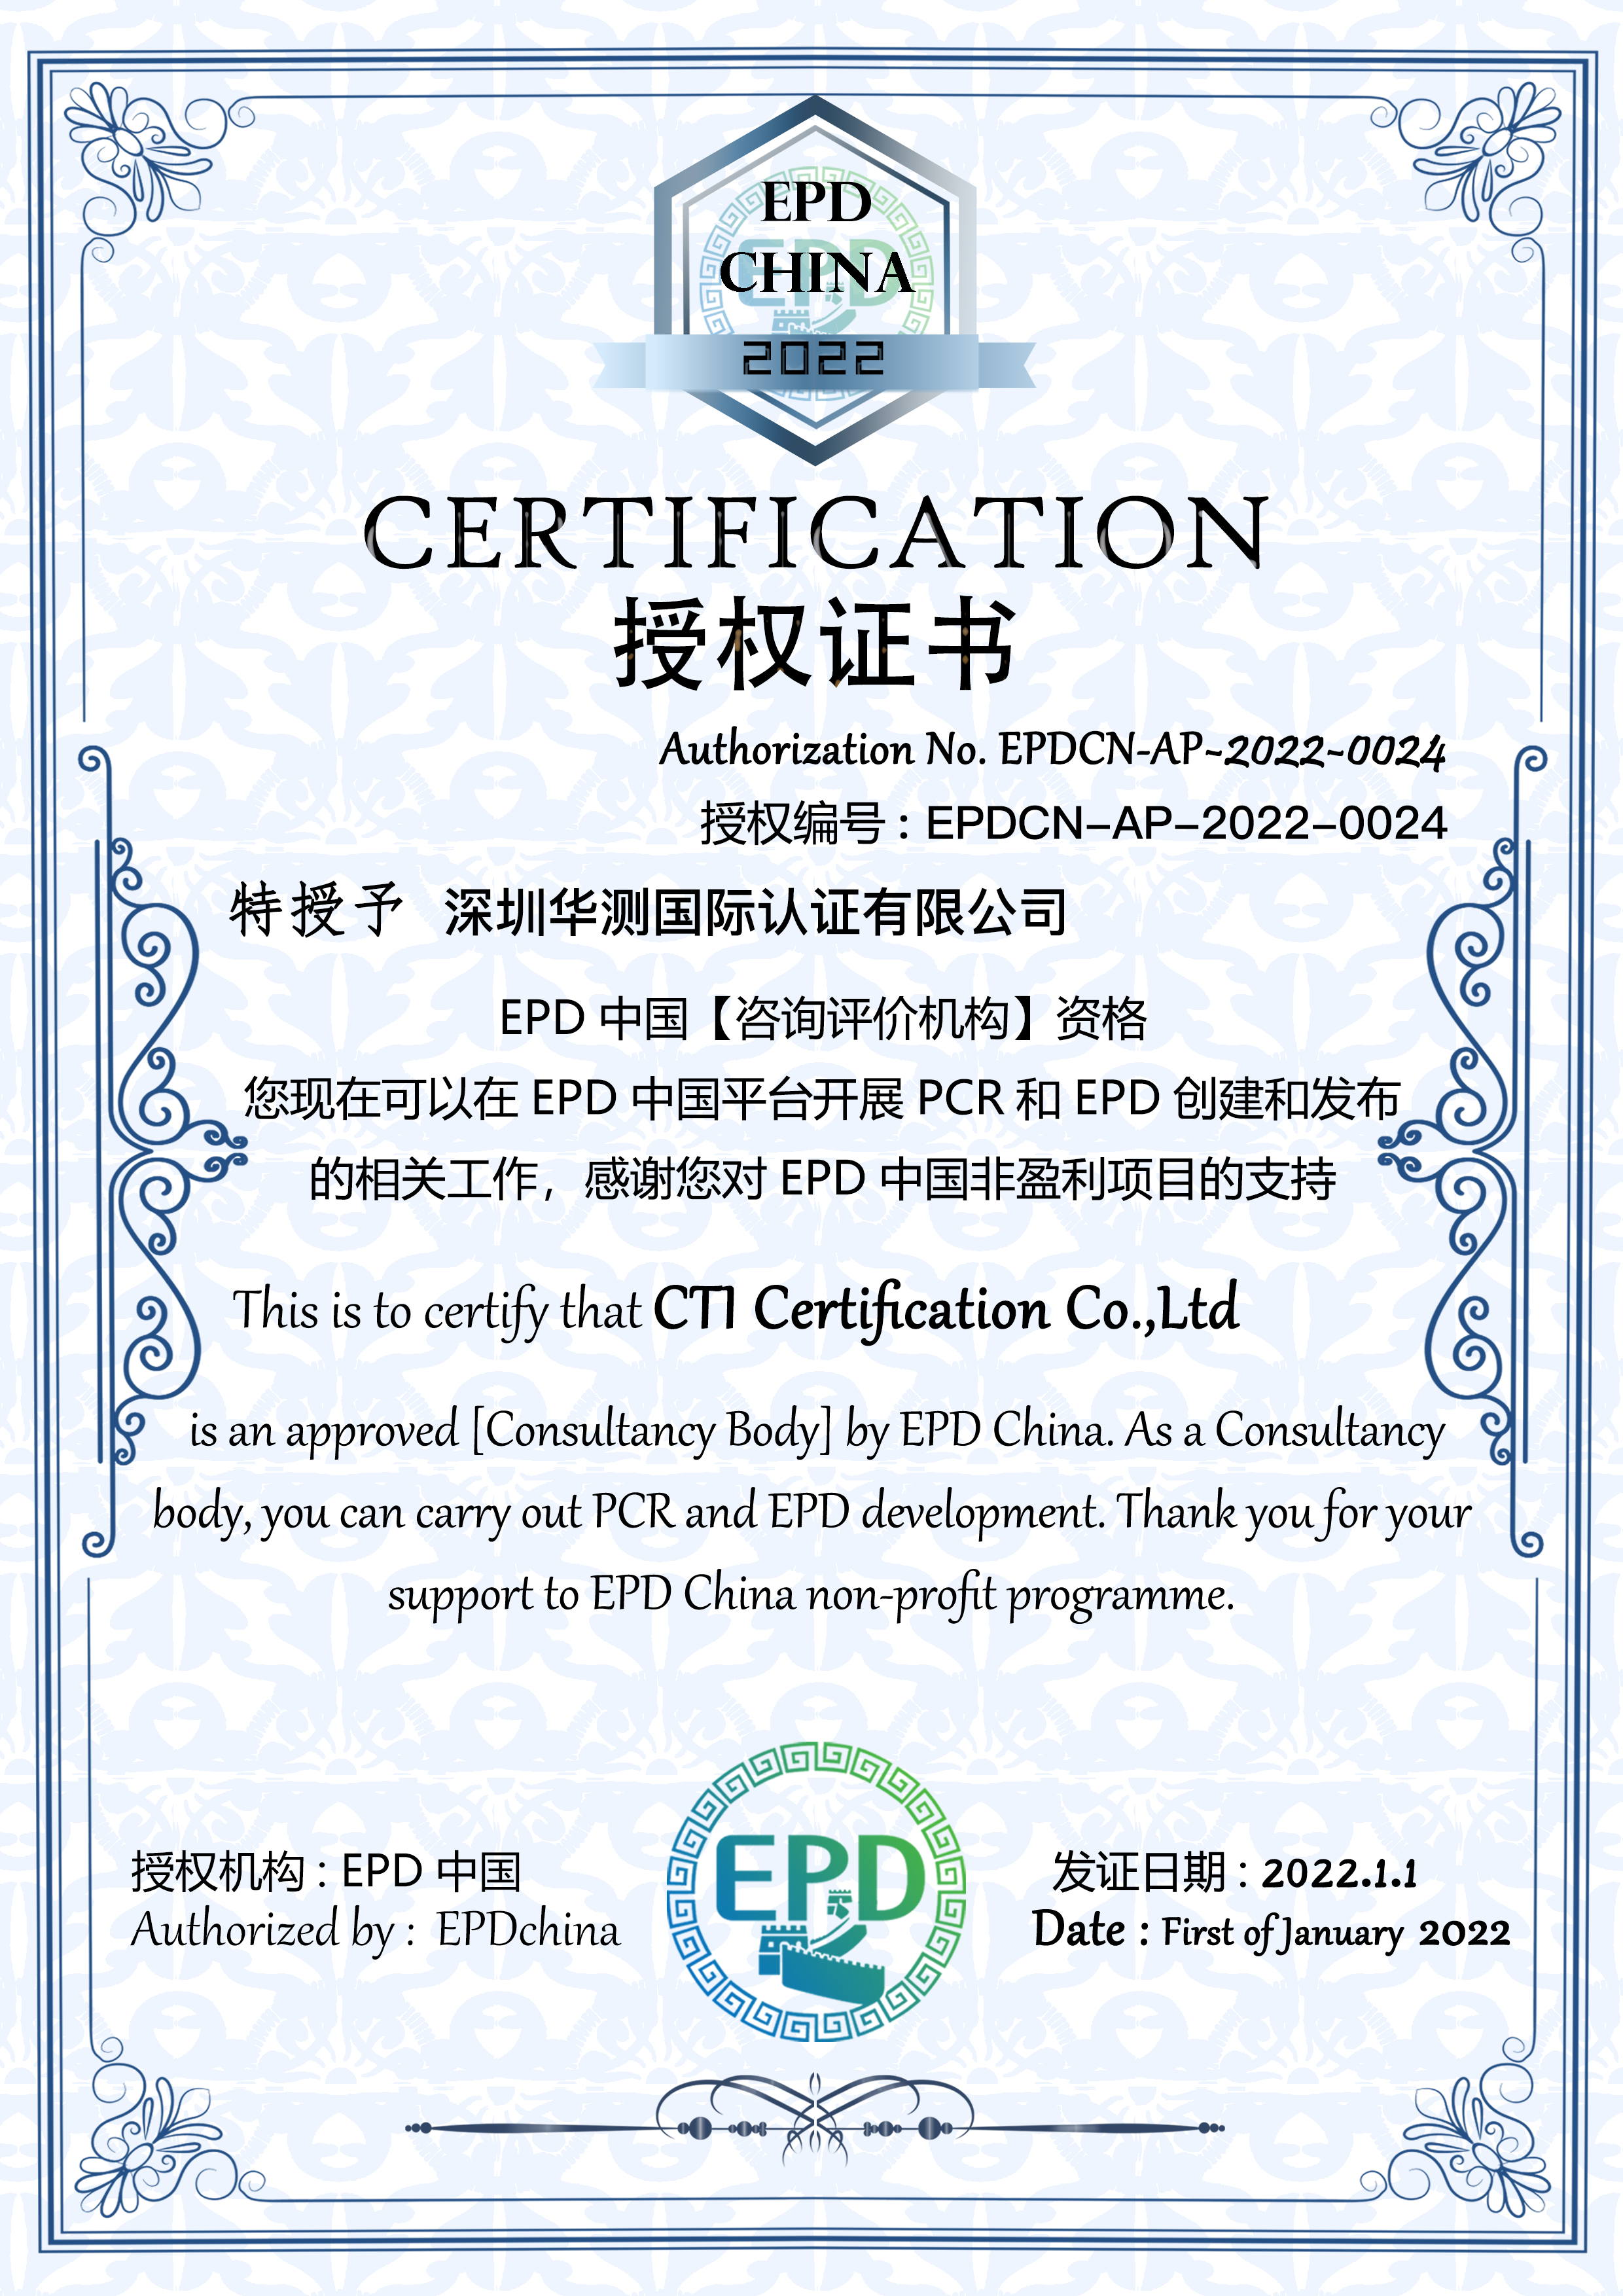 EPD Consulting and Evaluation Agency Certificate